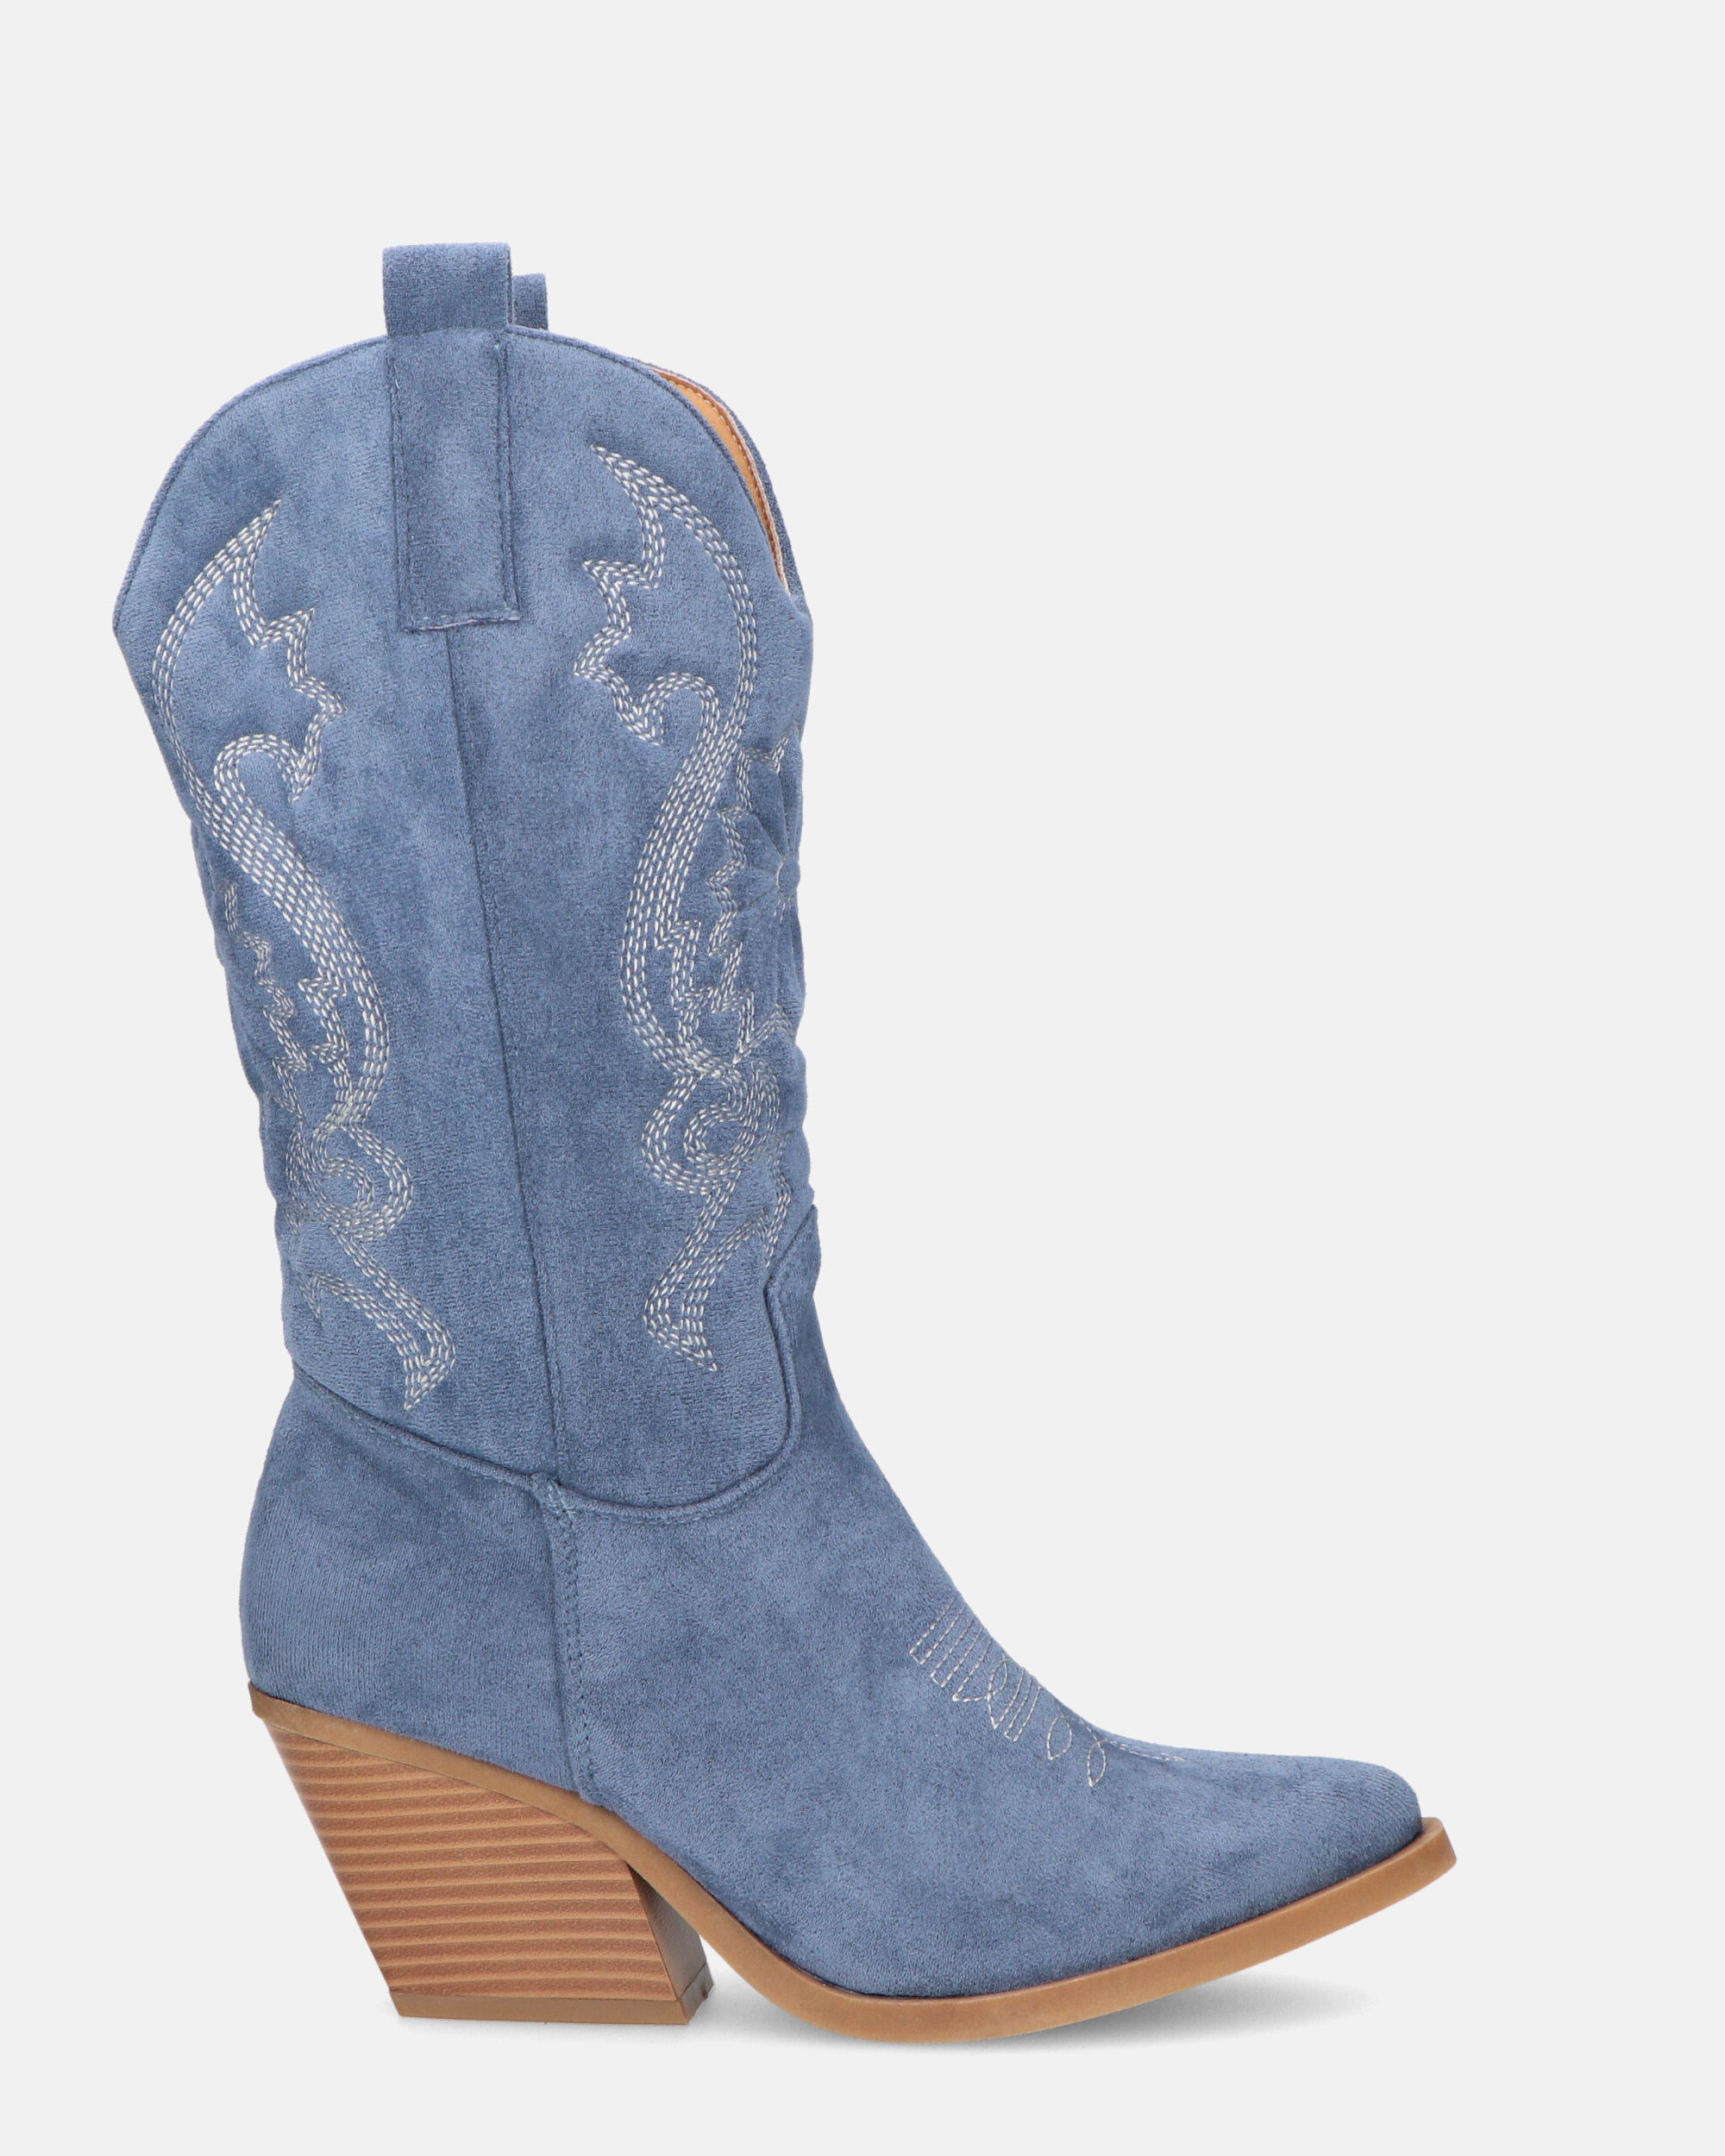 VITA - blue suede camperos with embroidery and zip